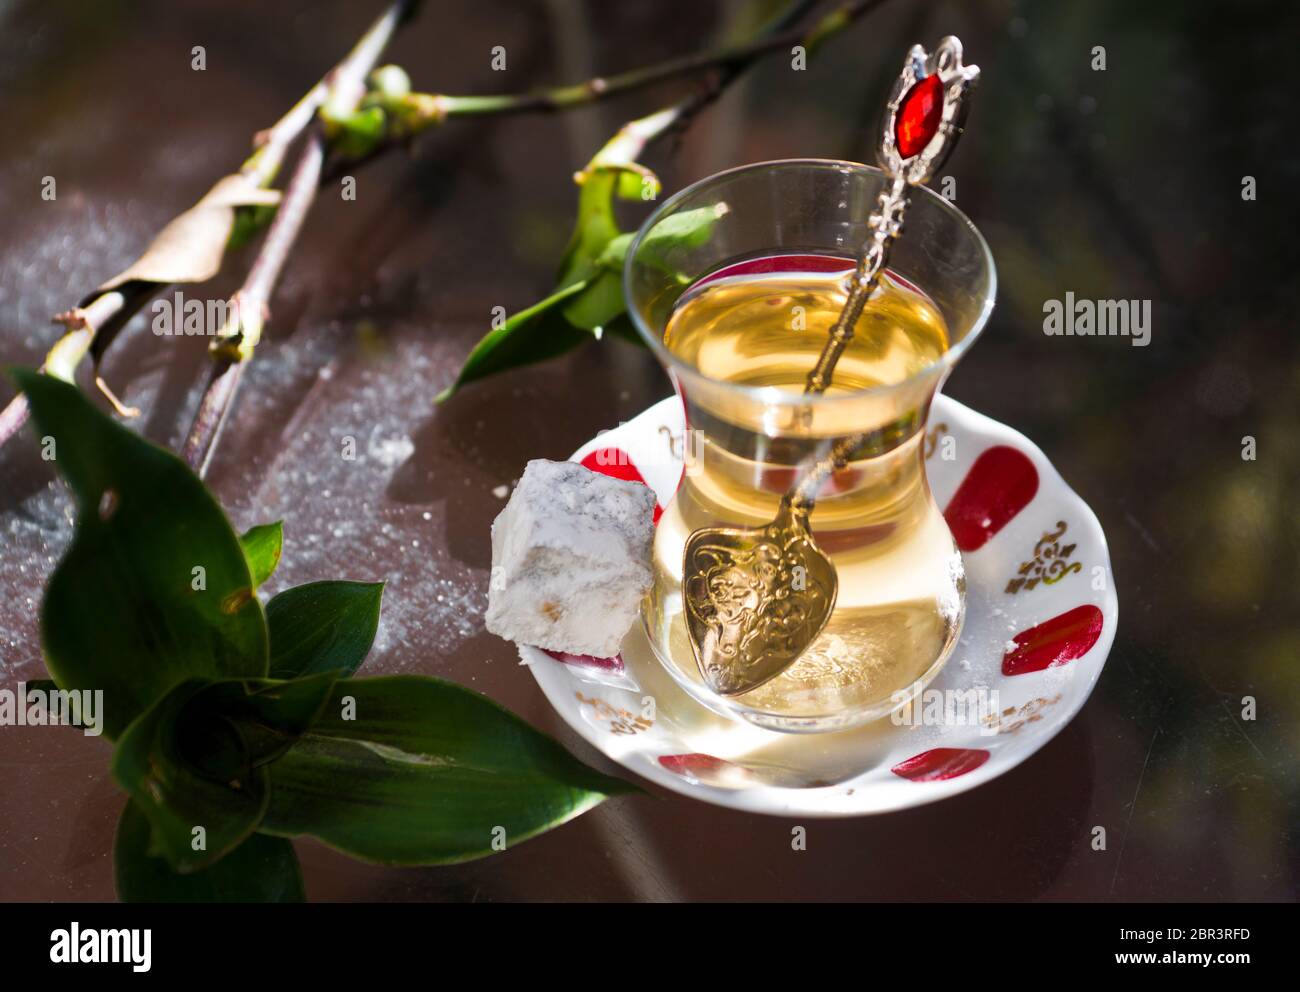 Turkish apple tea and sweet (turkish delights), served on a glass table in a garden Stock Photo